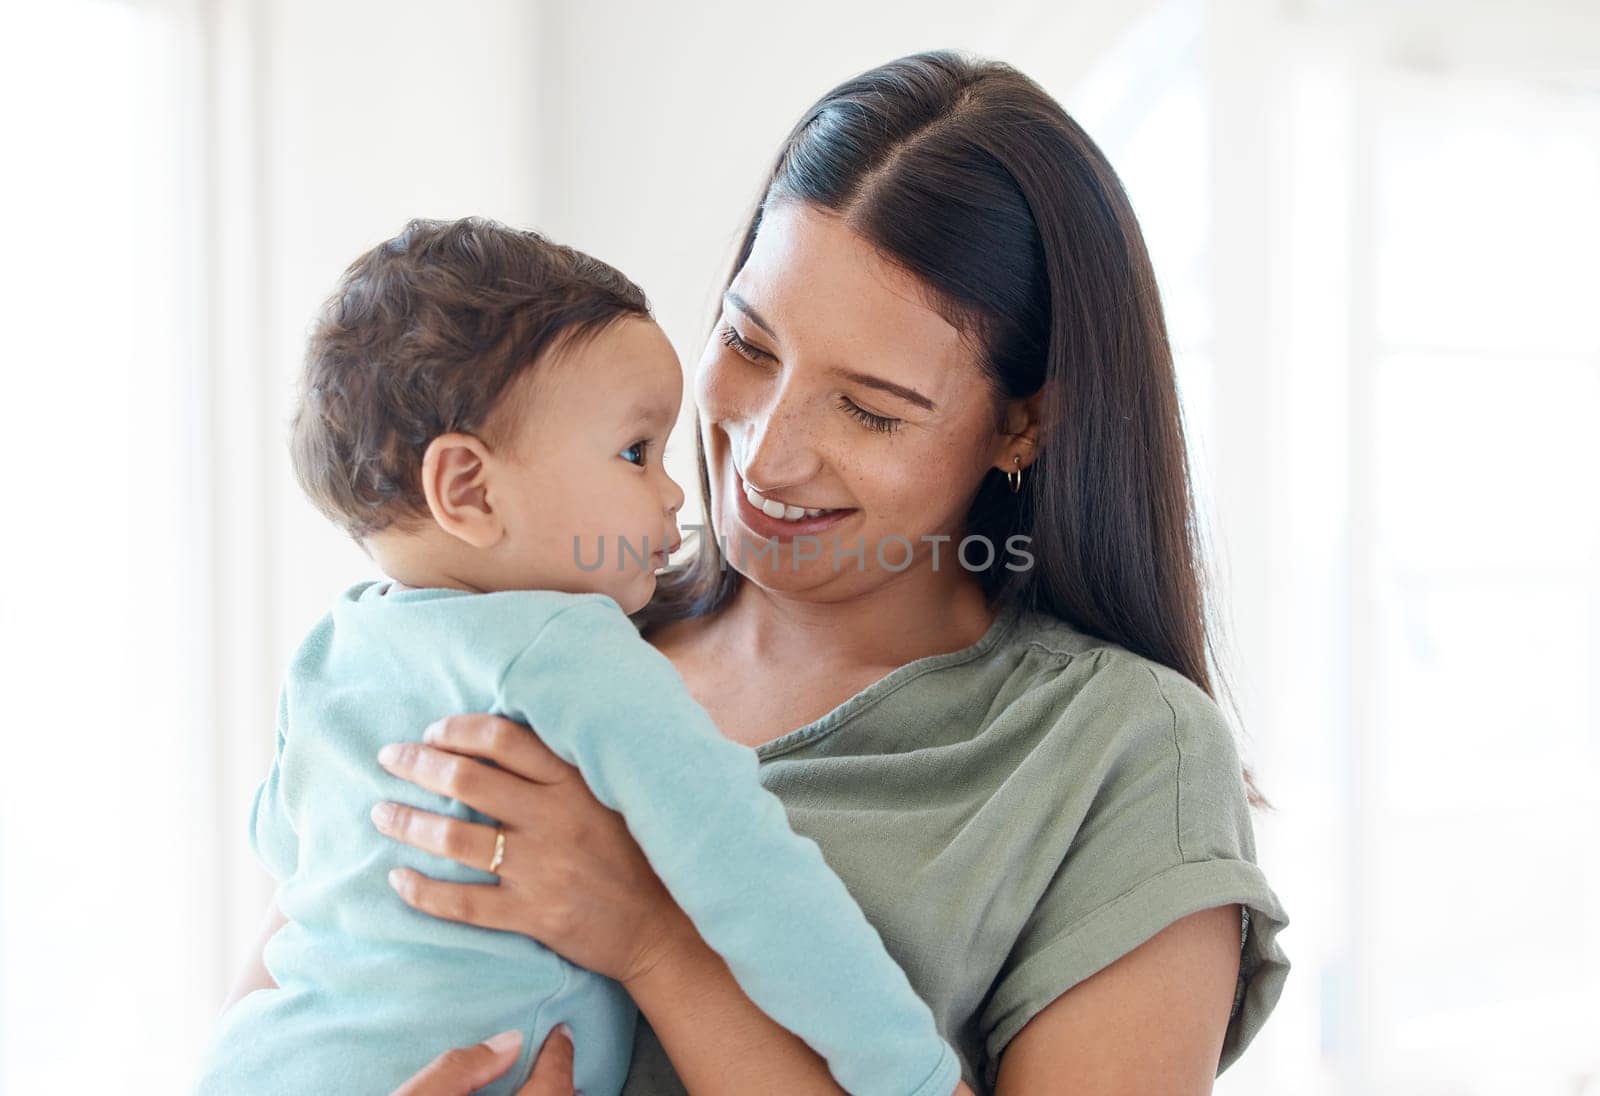 Smile, mother and holding baby in home for love, care and quality time together for childcare, development and growth. Mom carrying infant kid, newborn girl and support of comfort, bond and happiness.